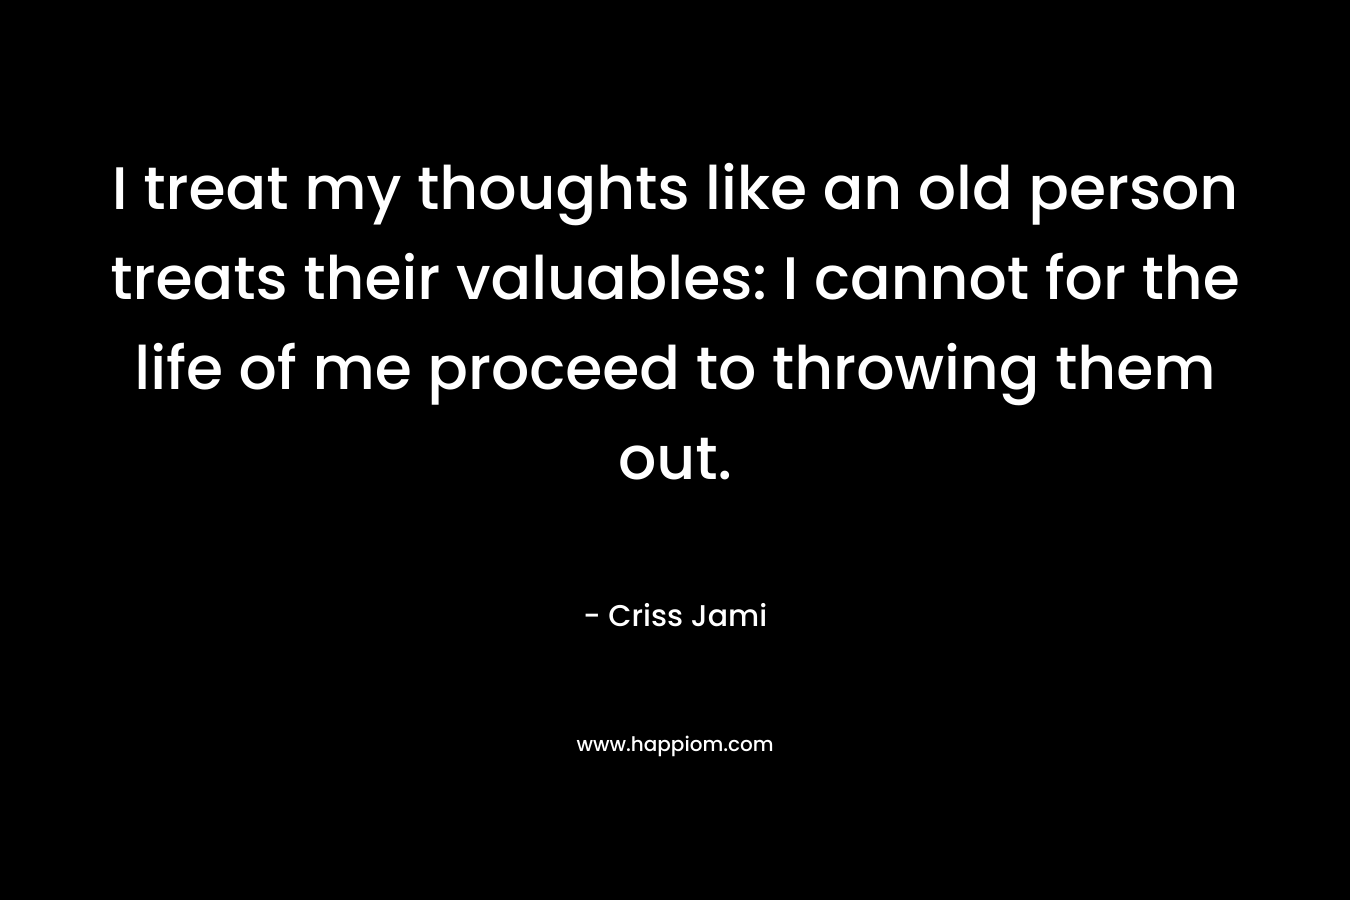 I treat my thoughts like an old person treats their valuables: I cannot for the life of me proceed to throwing them out.